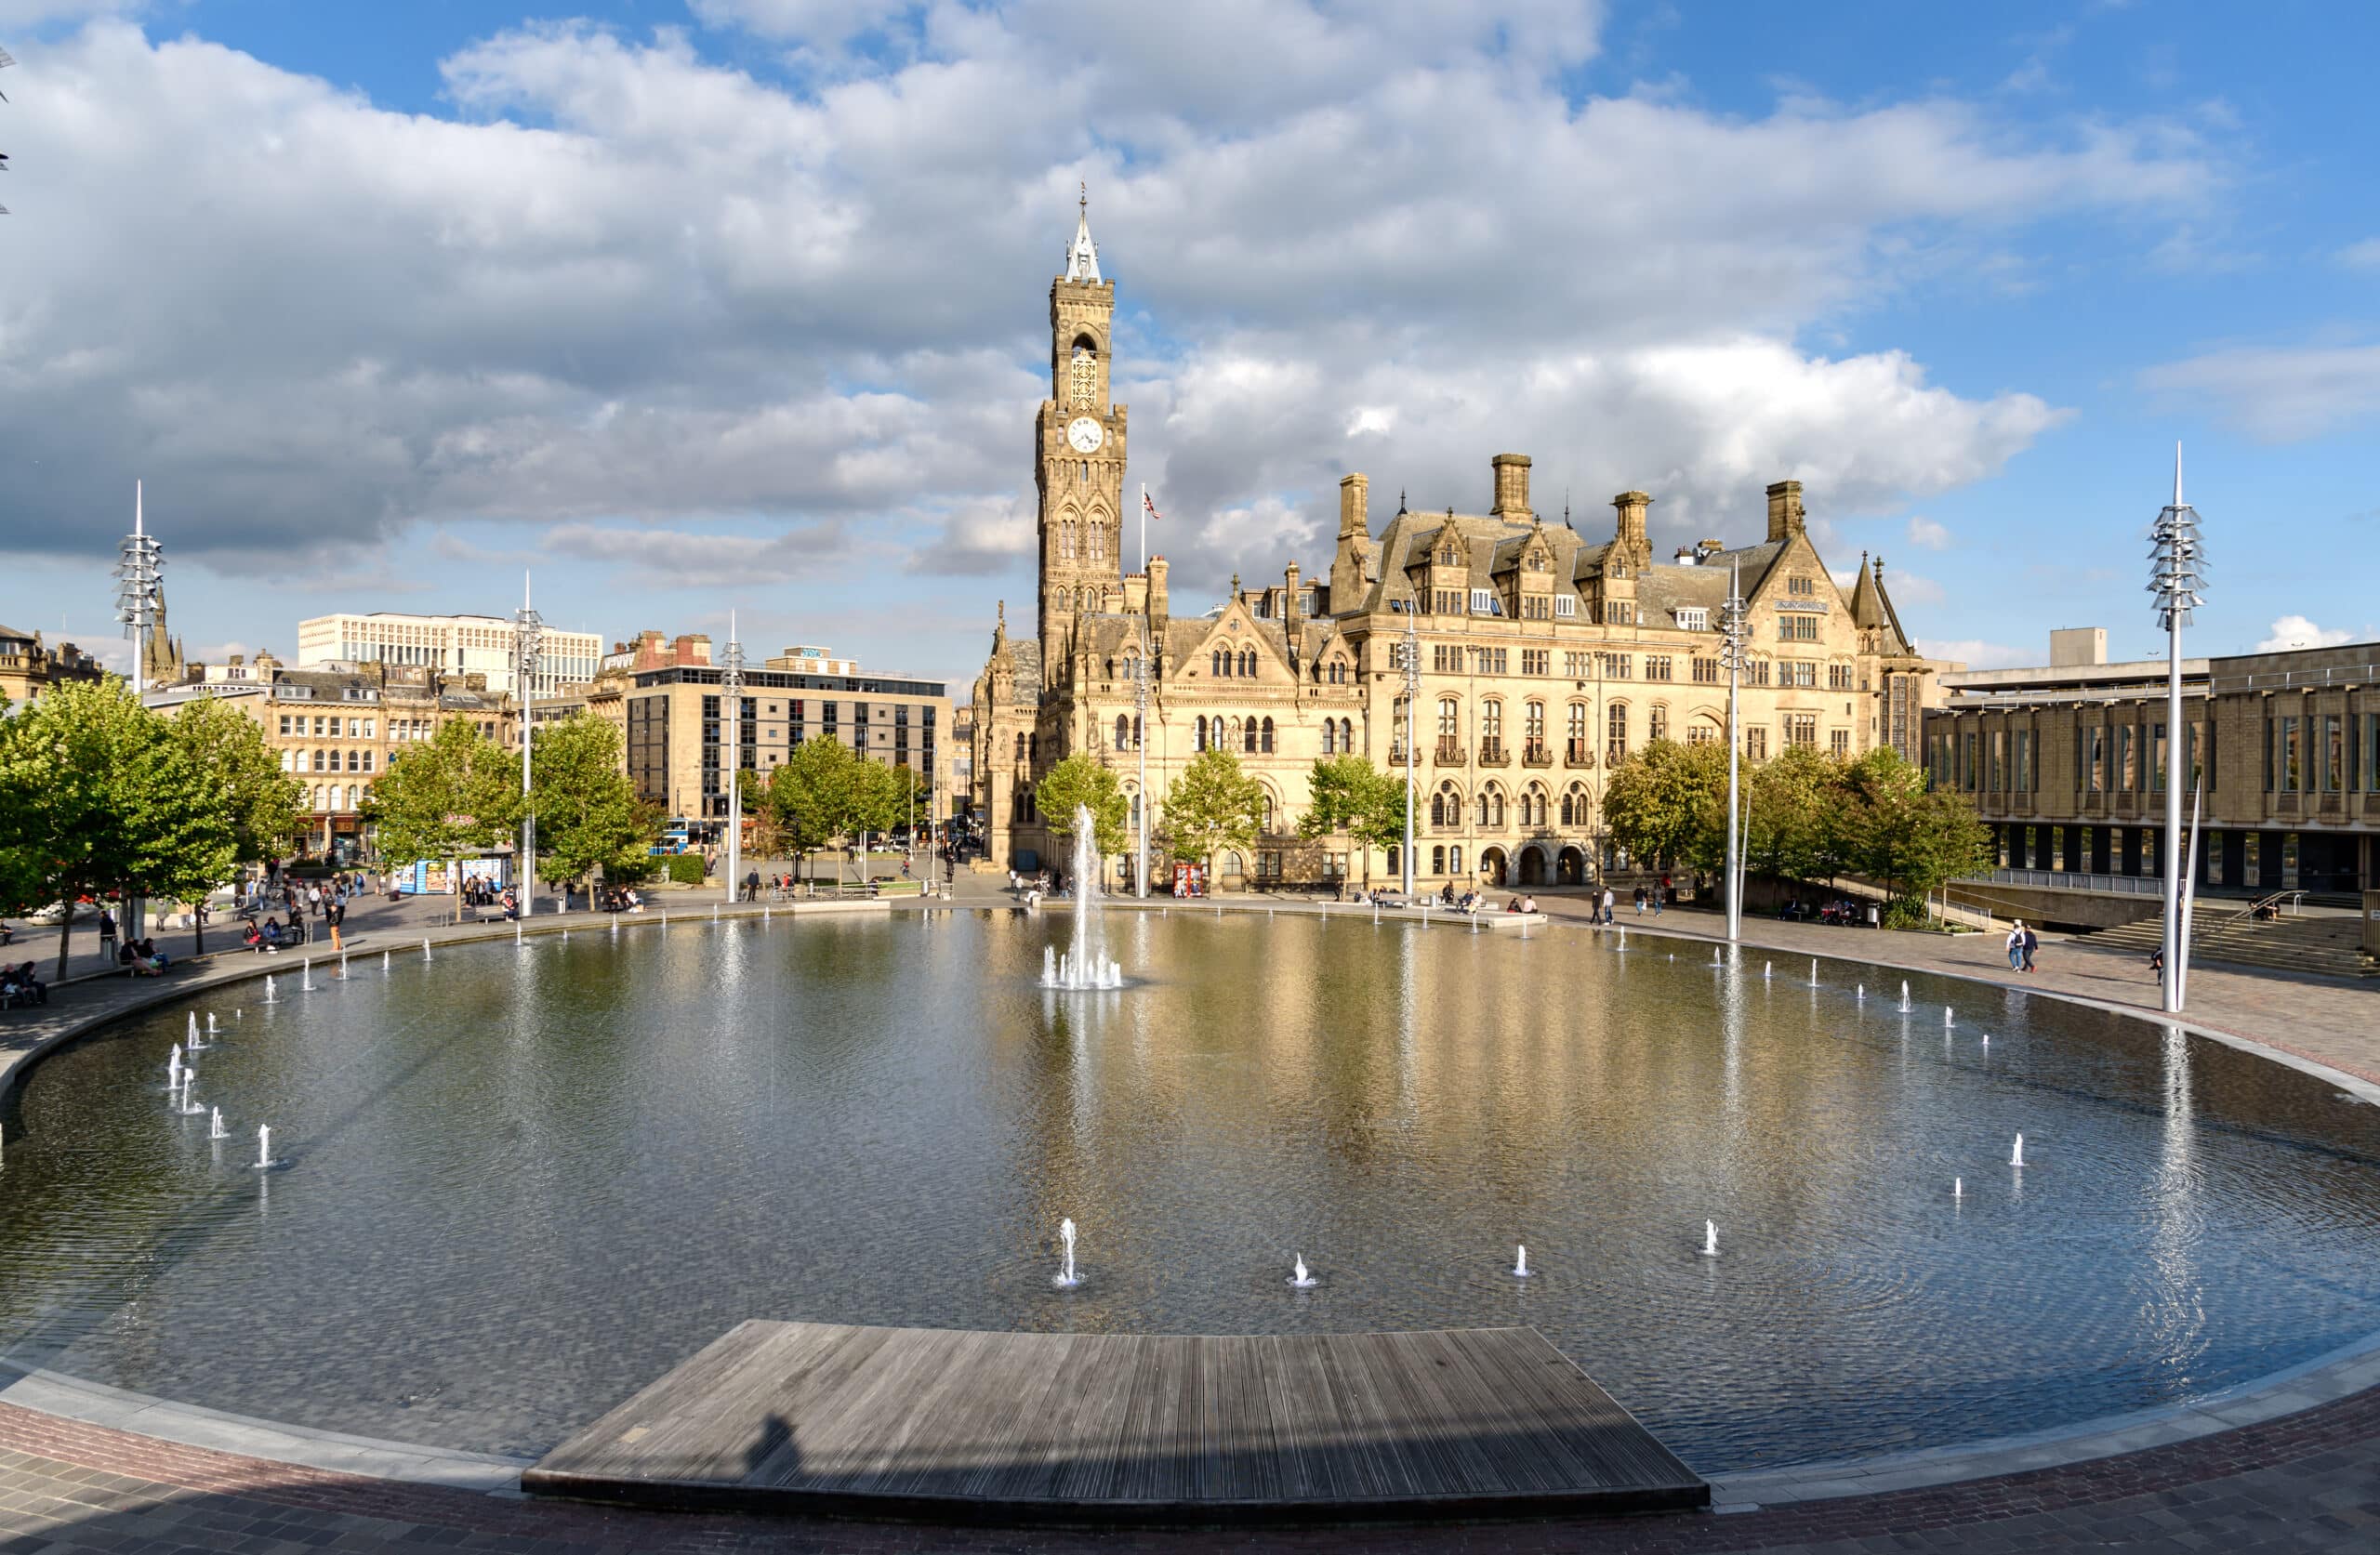 How Easy Is It to Sell Property in Bradford?